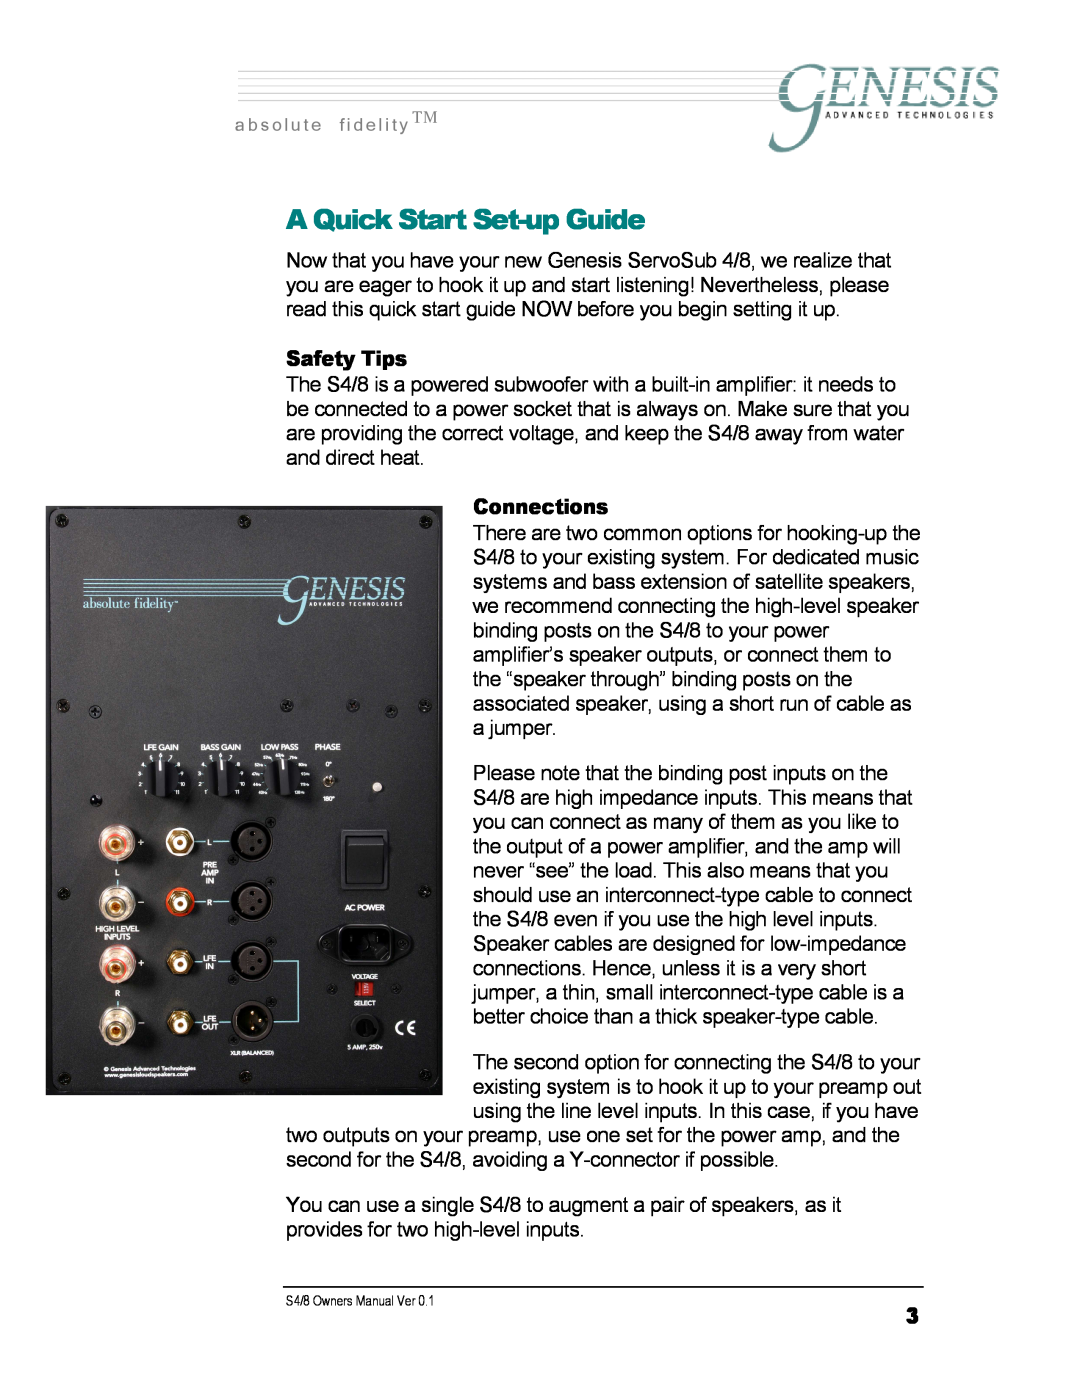 Genesis Advanced Technologies S4/8 owner manual A Quick Start Set-upGuide, a b s o l u t e f i d e l i t y 